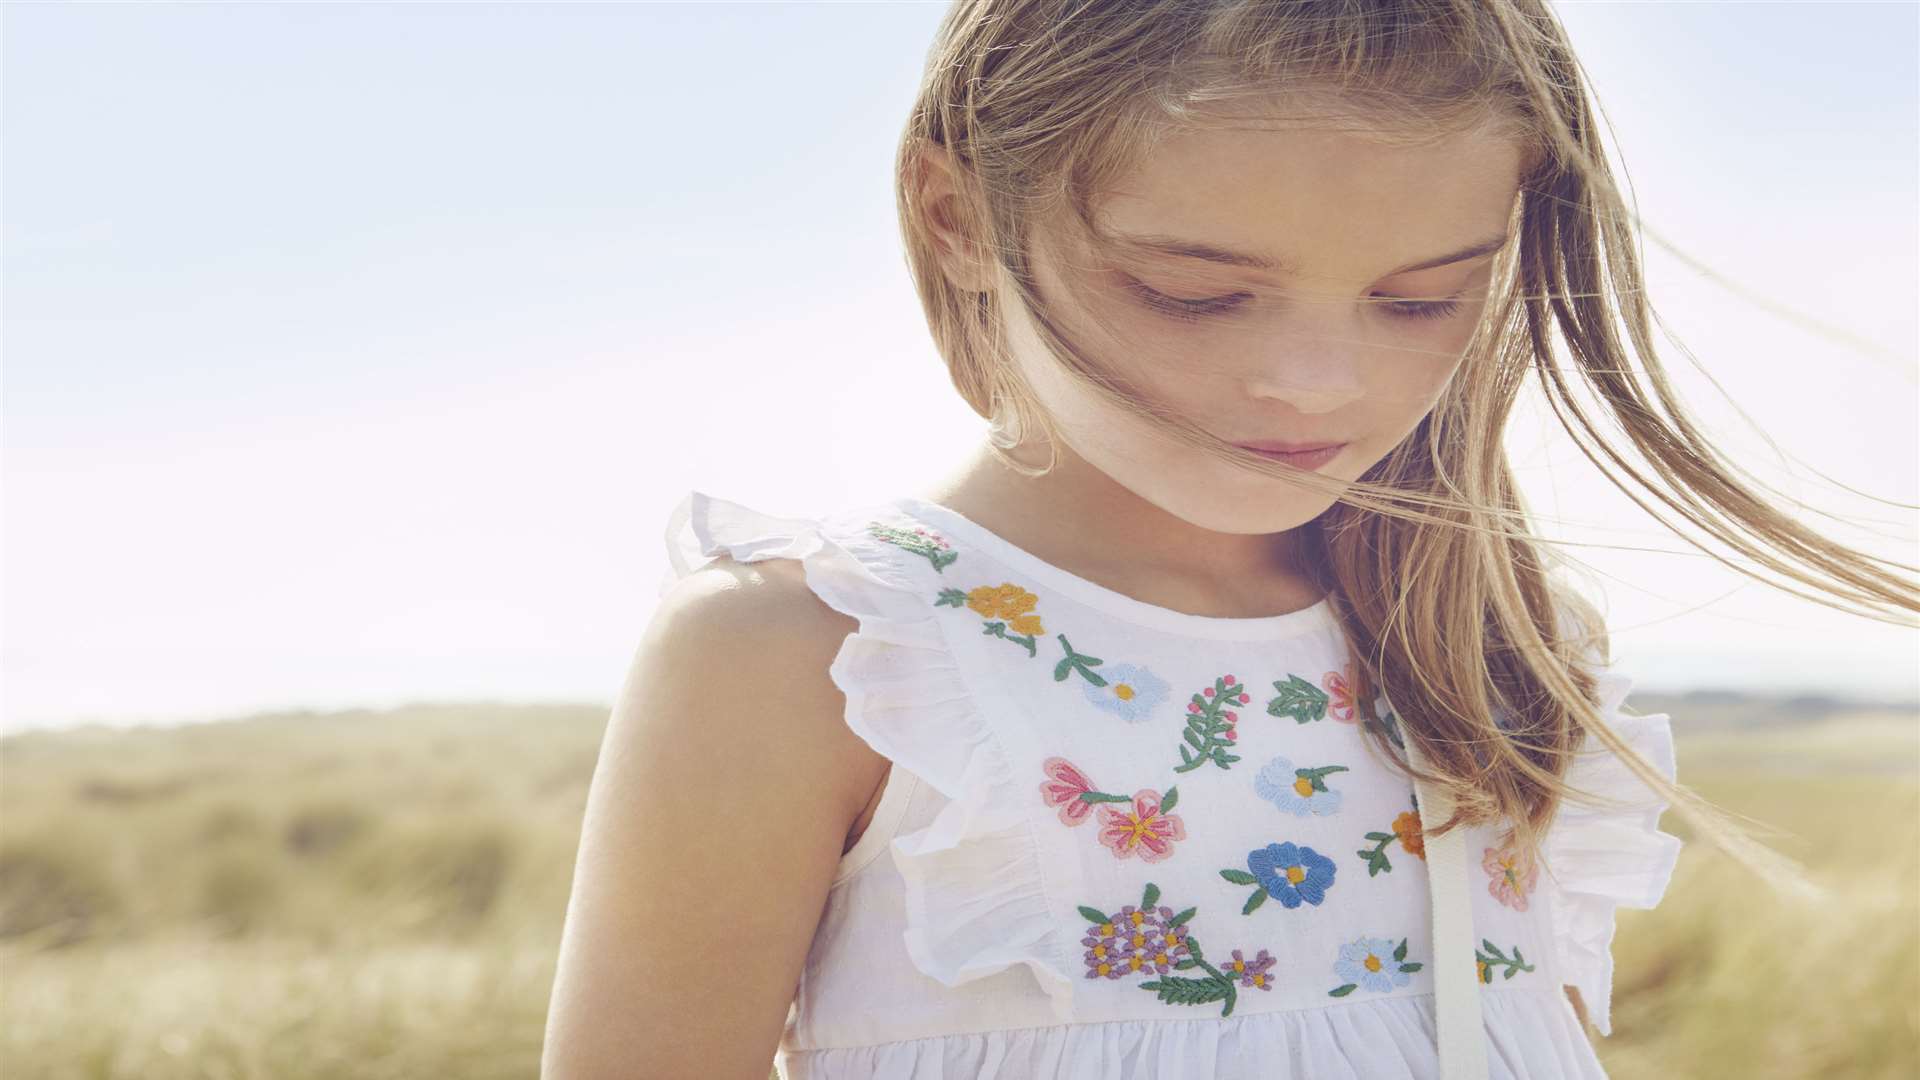 Embrace the ruffle trend with Cath Kidston's Embroidered Dress With Frill Sleeves, 1-8 years, £24 - available from Monday, April 10